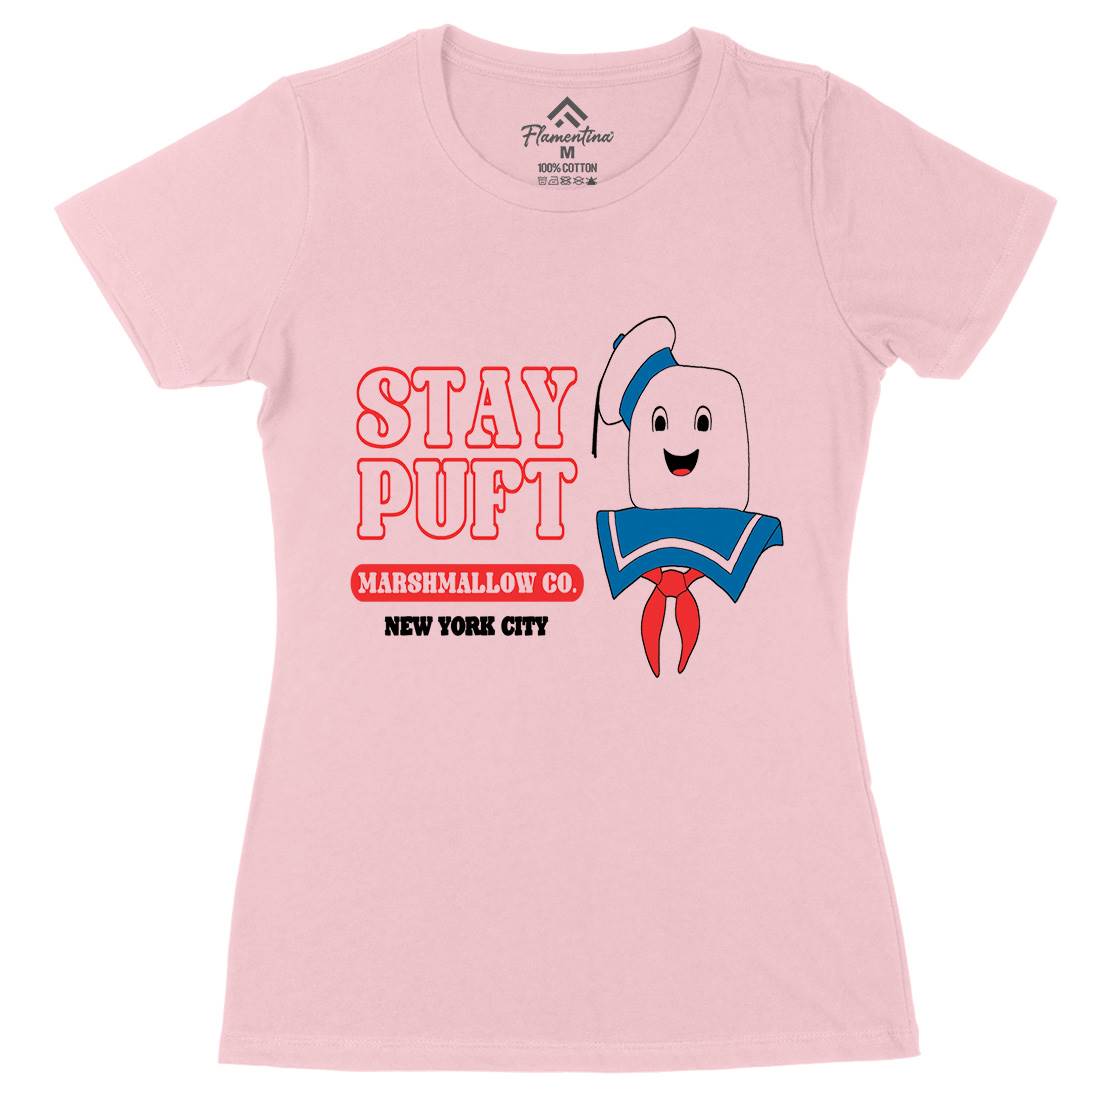 Stay Puft Co Womens Organic Crew Neck T-Shirt Space D141